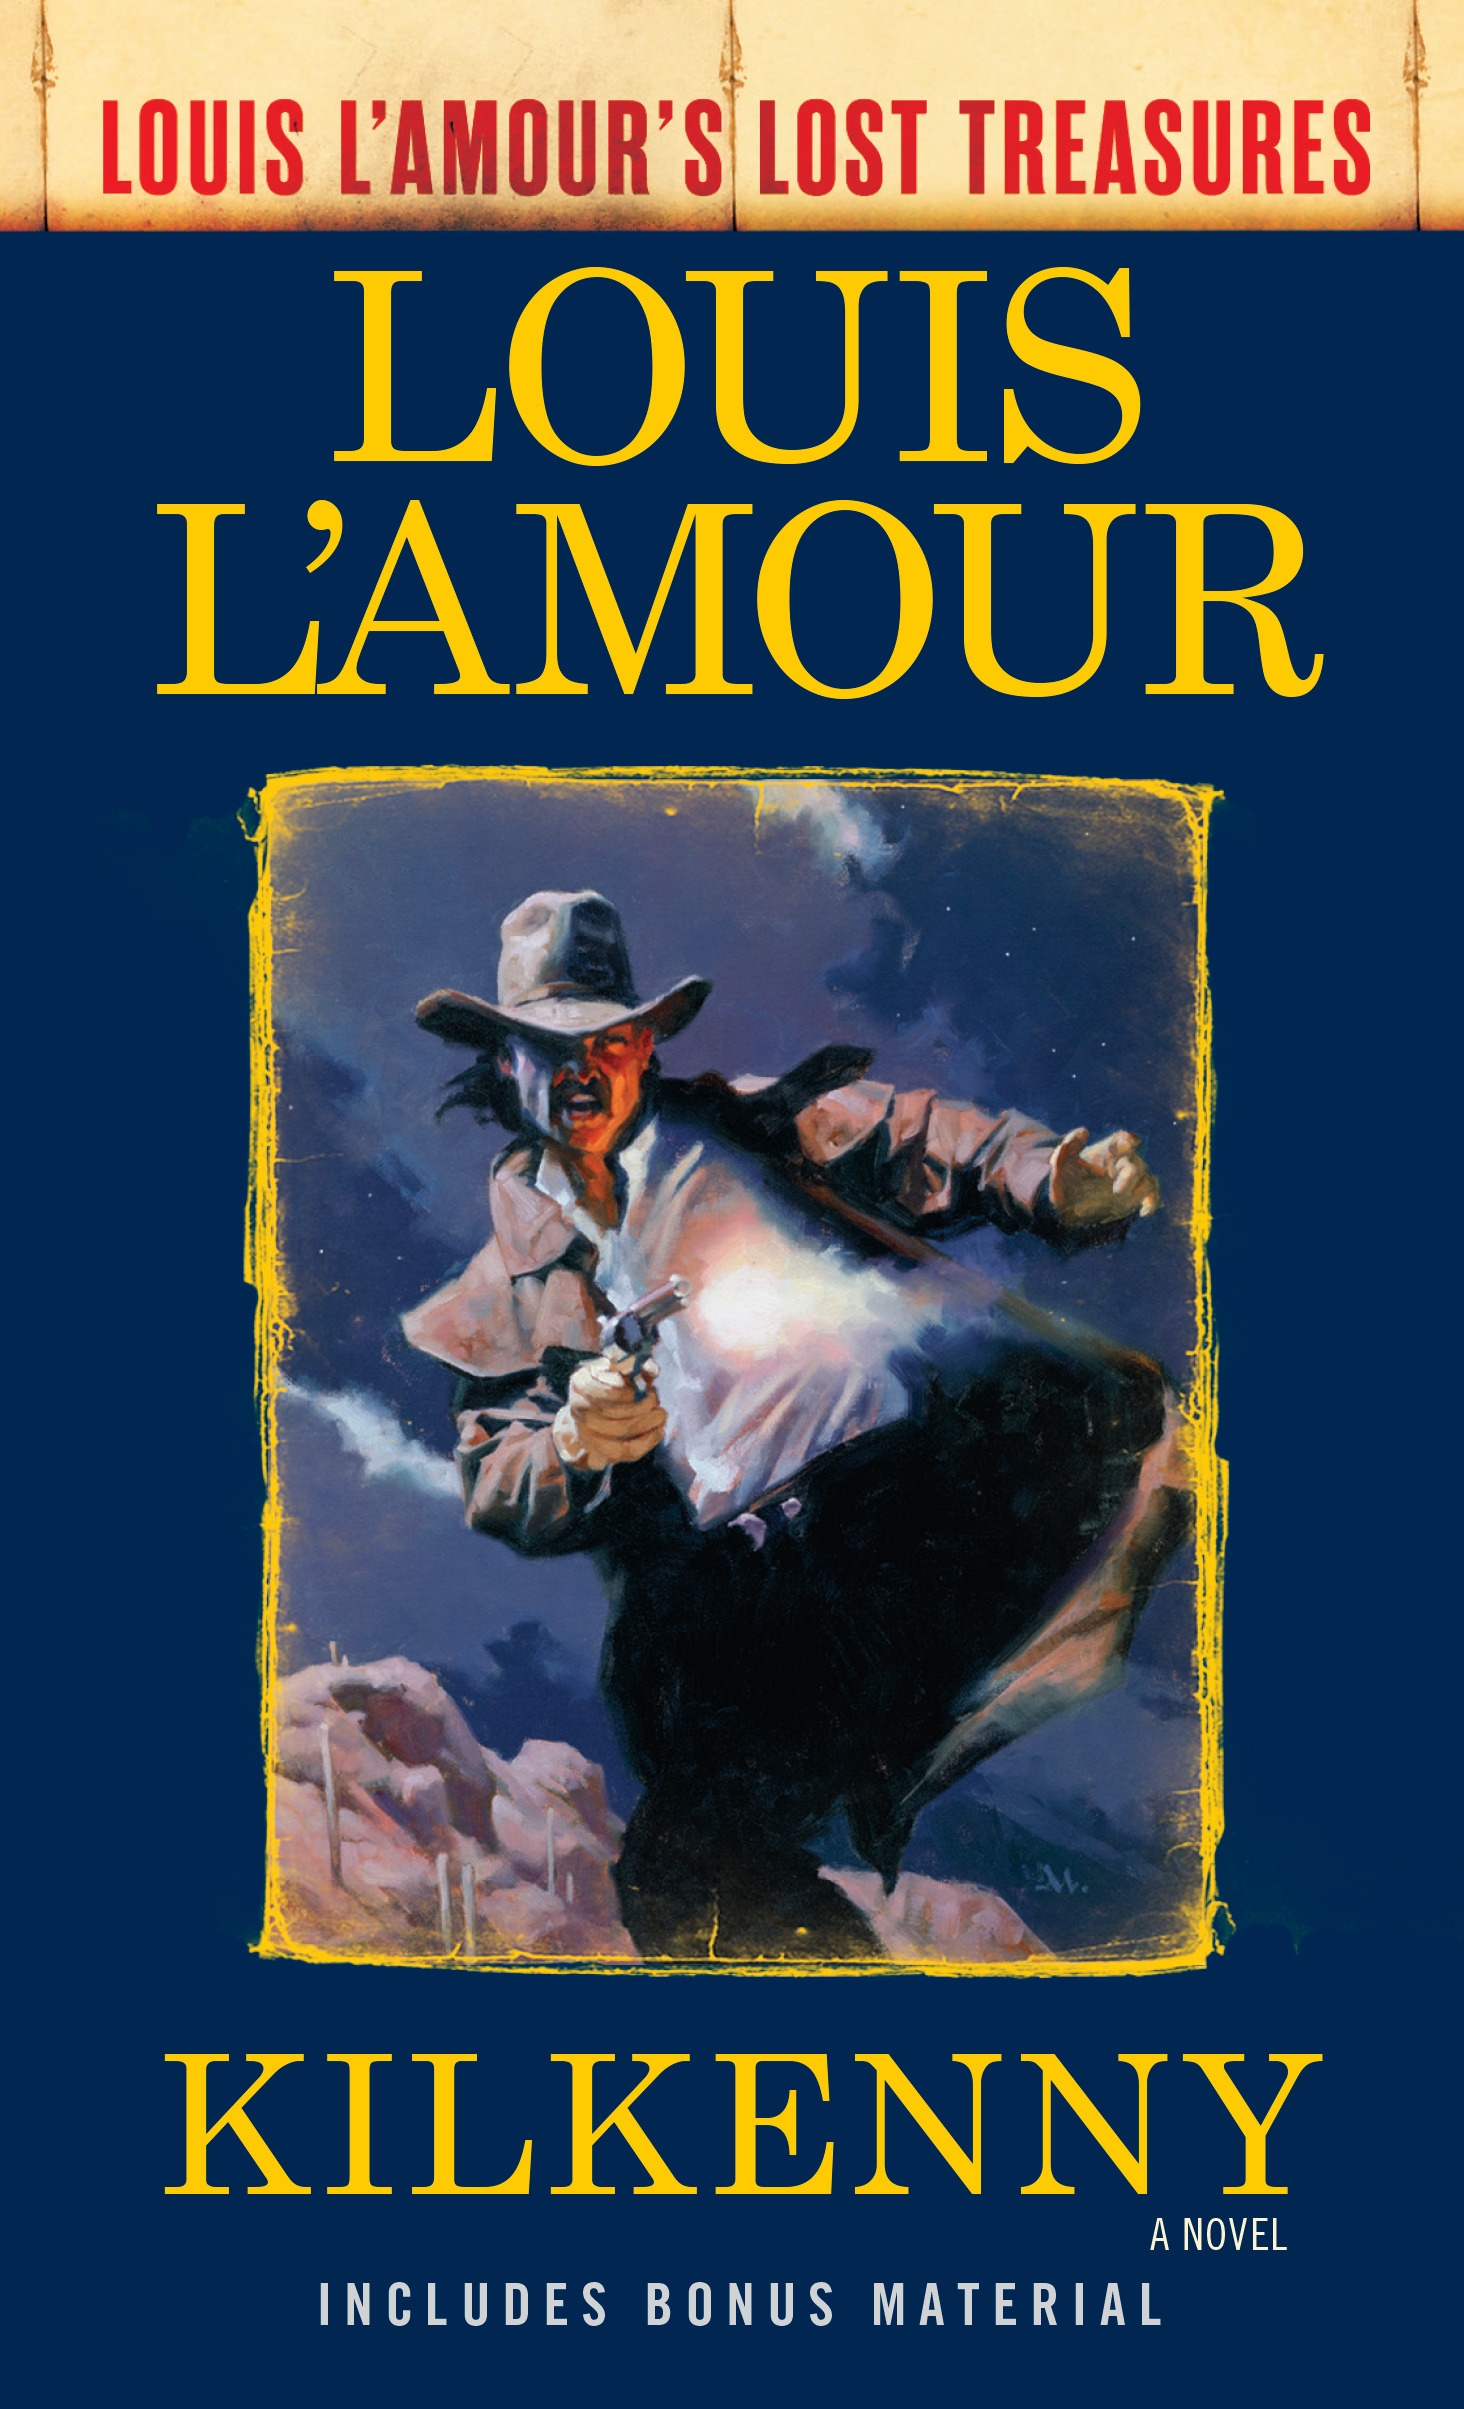 Louis L'Amour lives on in new book 'No Traveller Returns